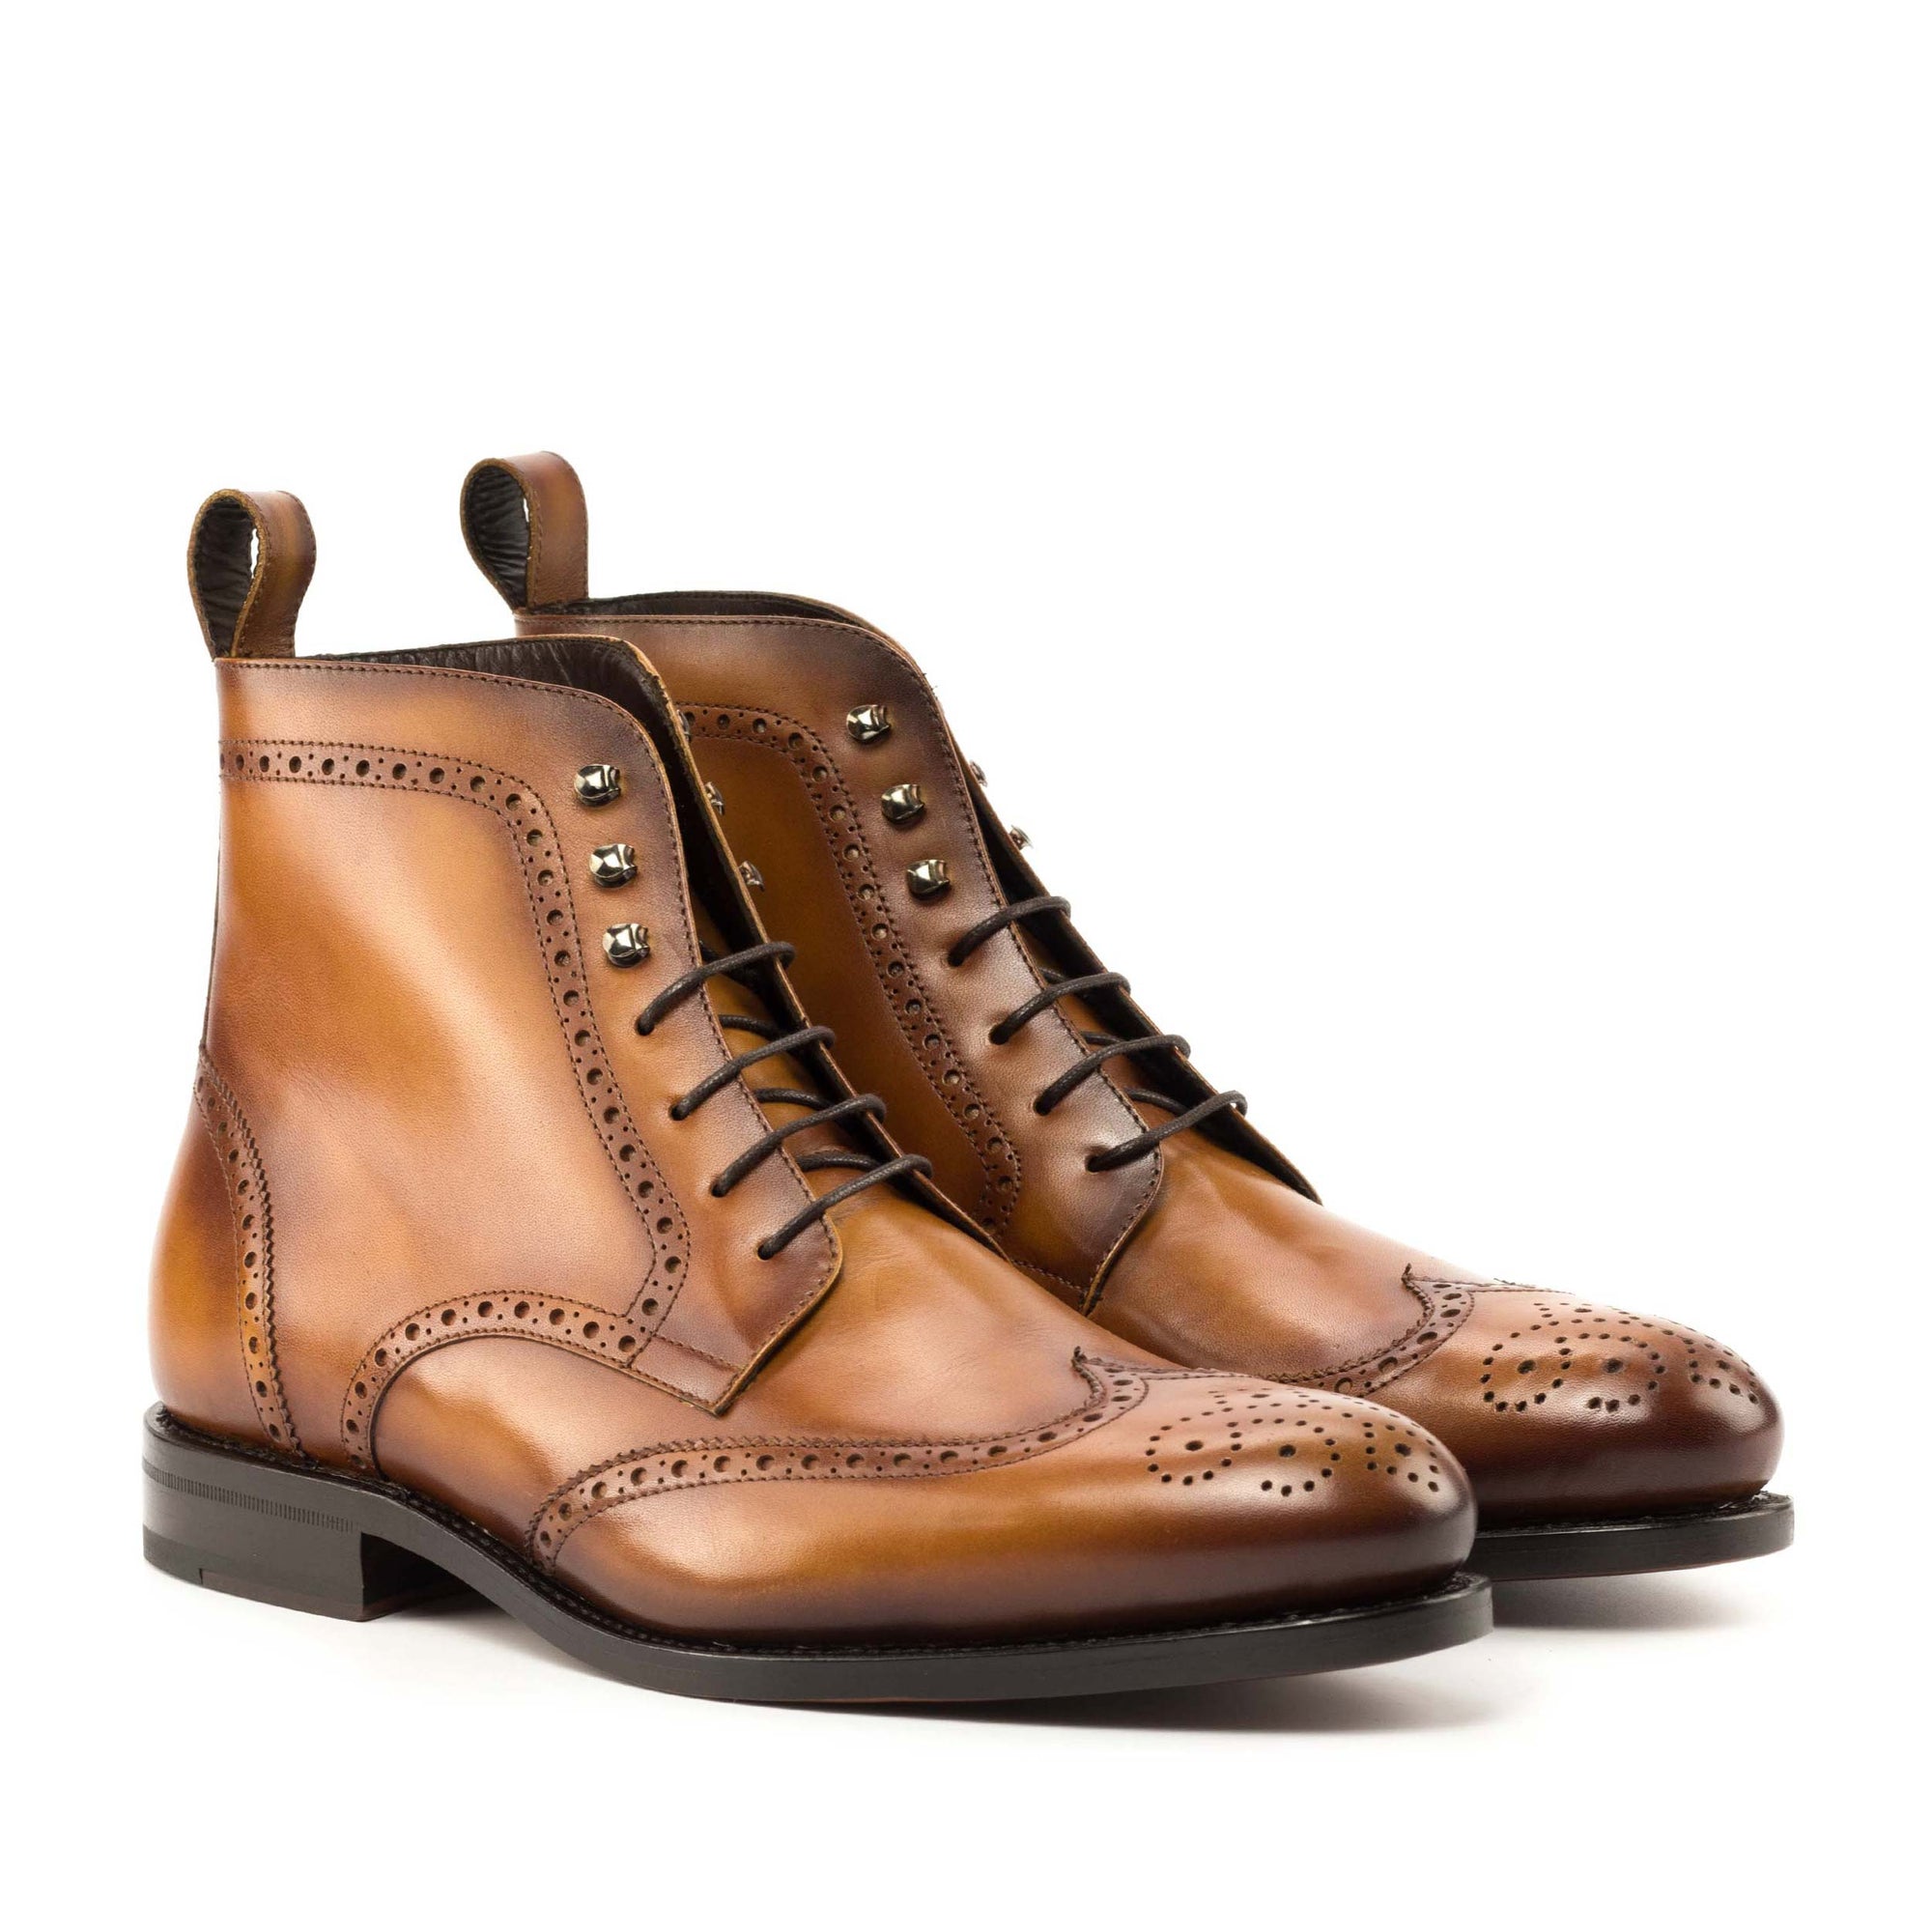 Leather Combat Boots, Bonnie Prince Charlie Military Brogue, Goodyear Welted